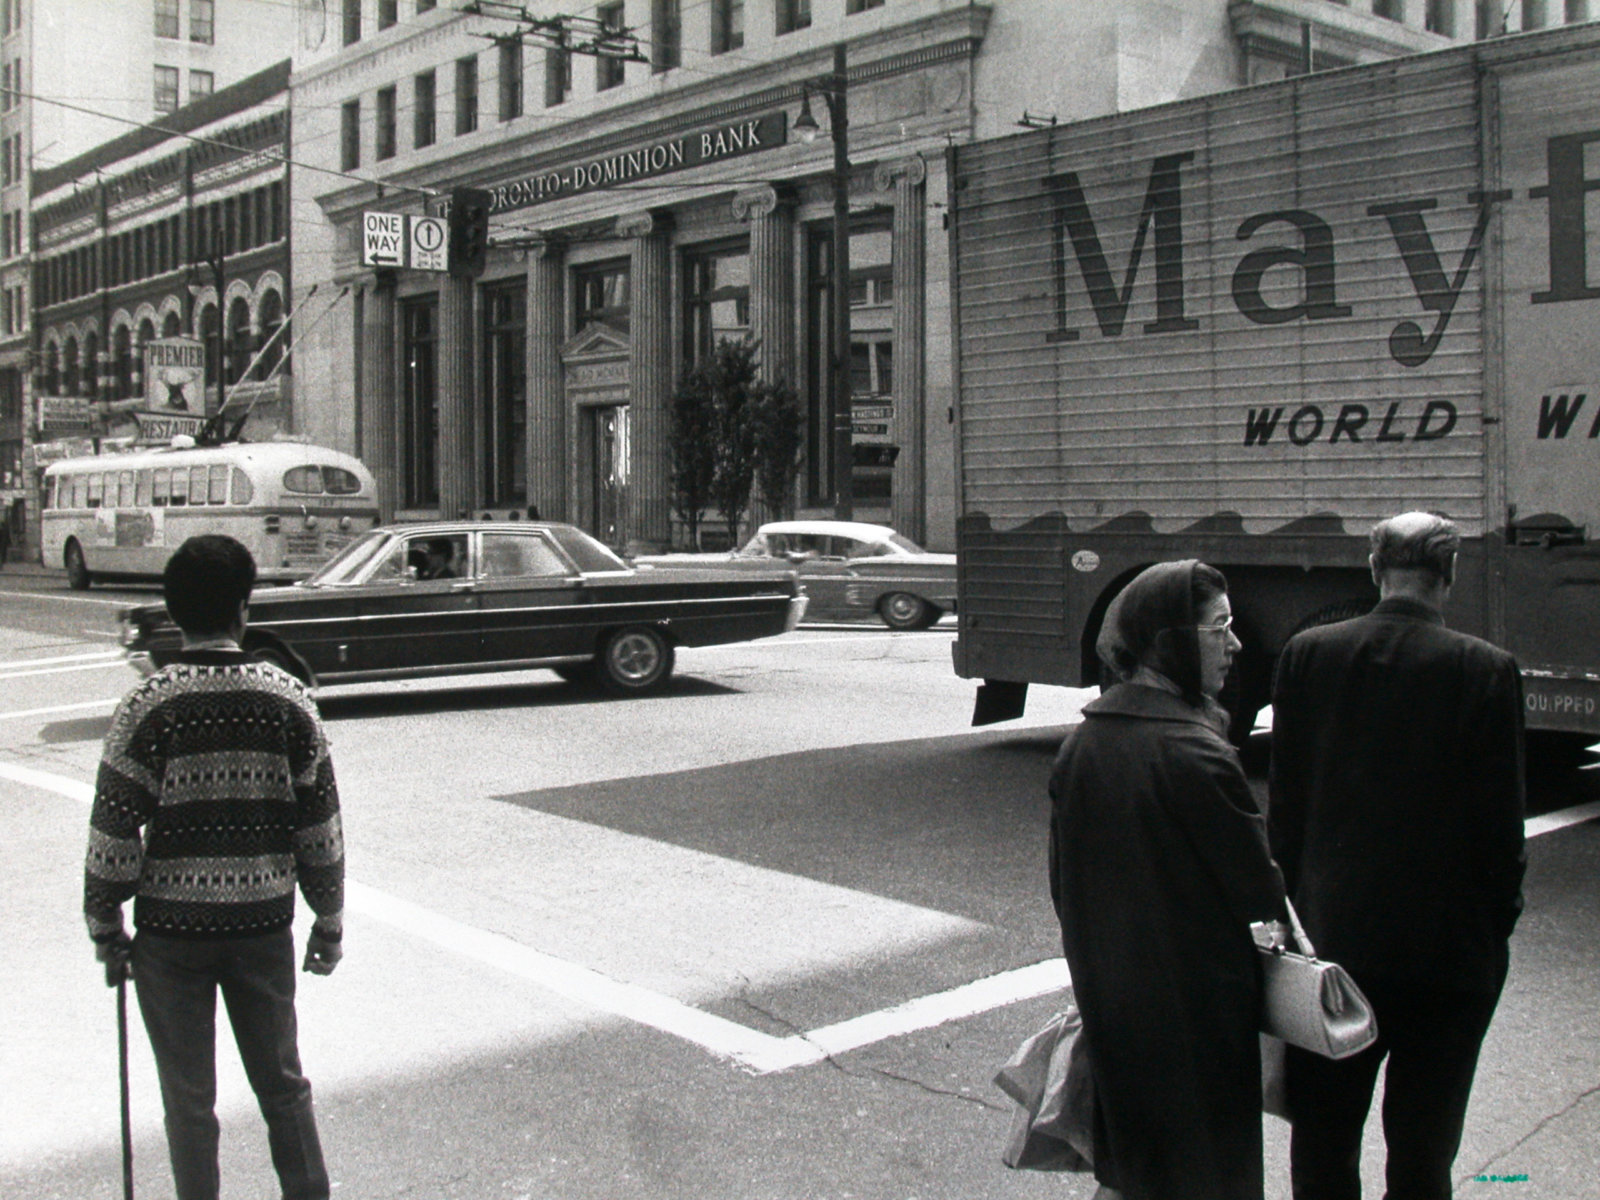 Ian Wallace, Intersection 1970, 1970–2008, black and white photograph, 10 x 14 in. (24 x 36 cm)